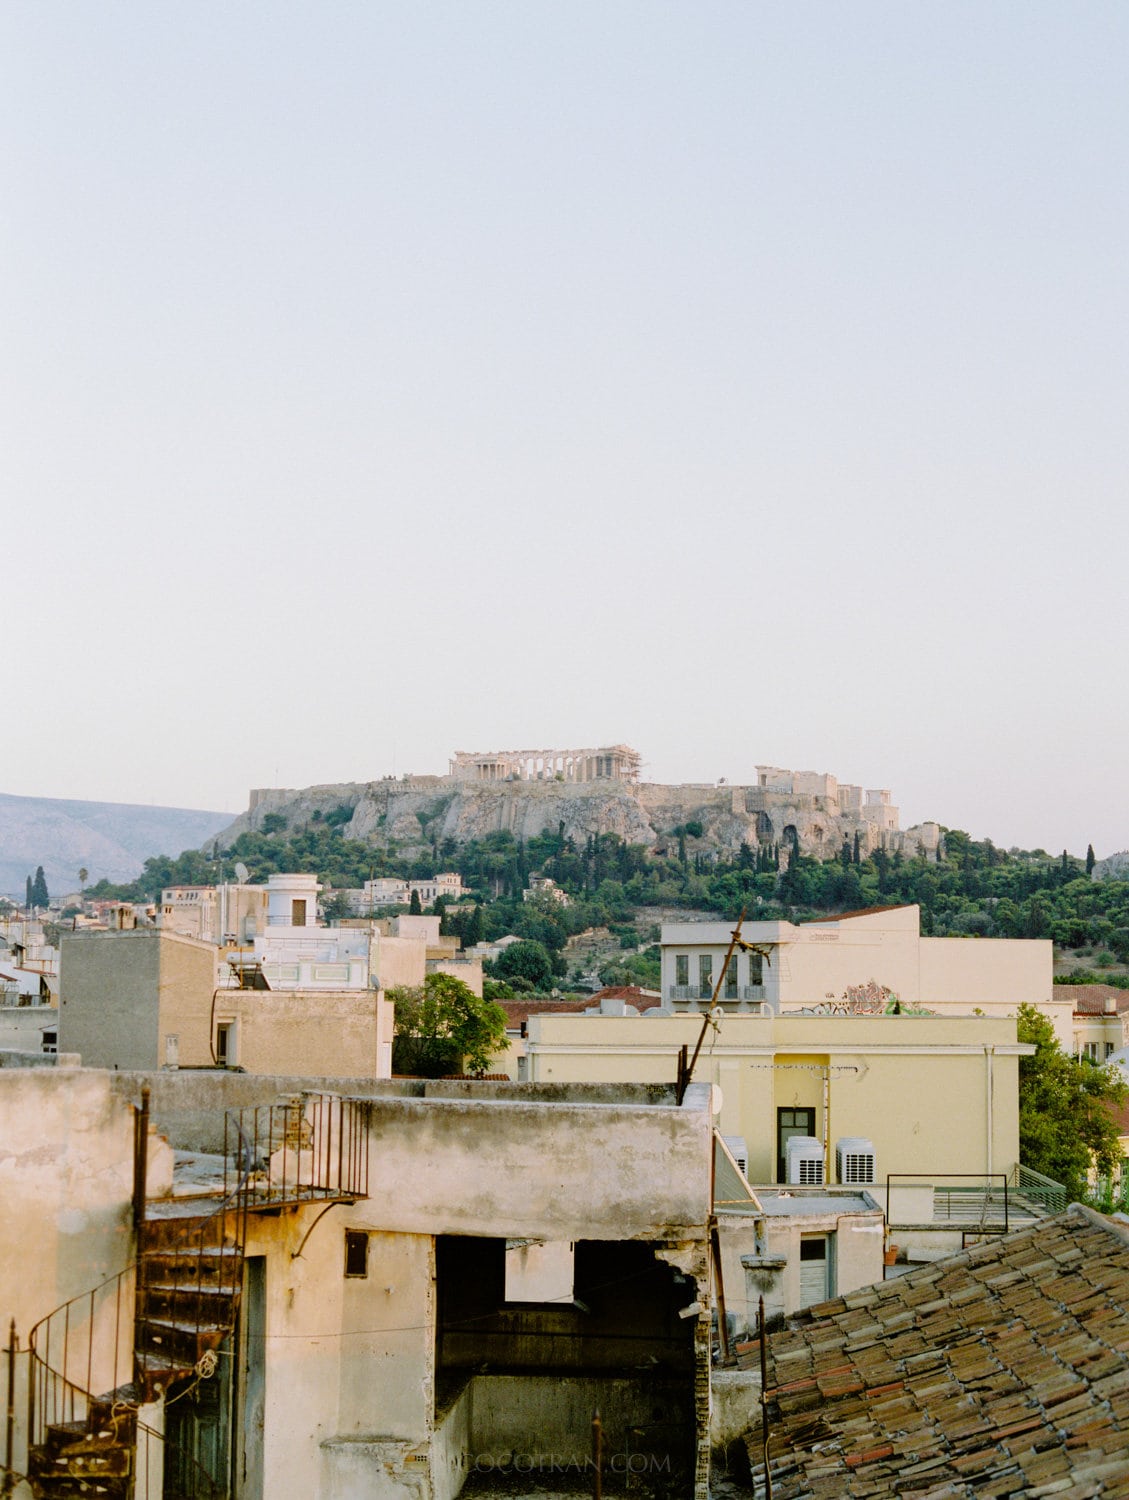 10 Top hotels in athens with acropolis view